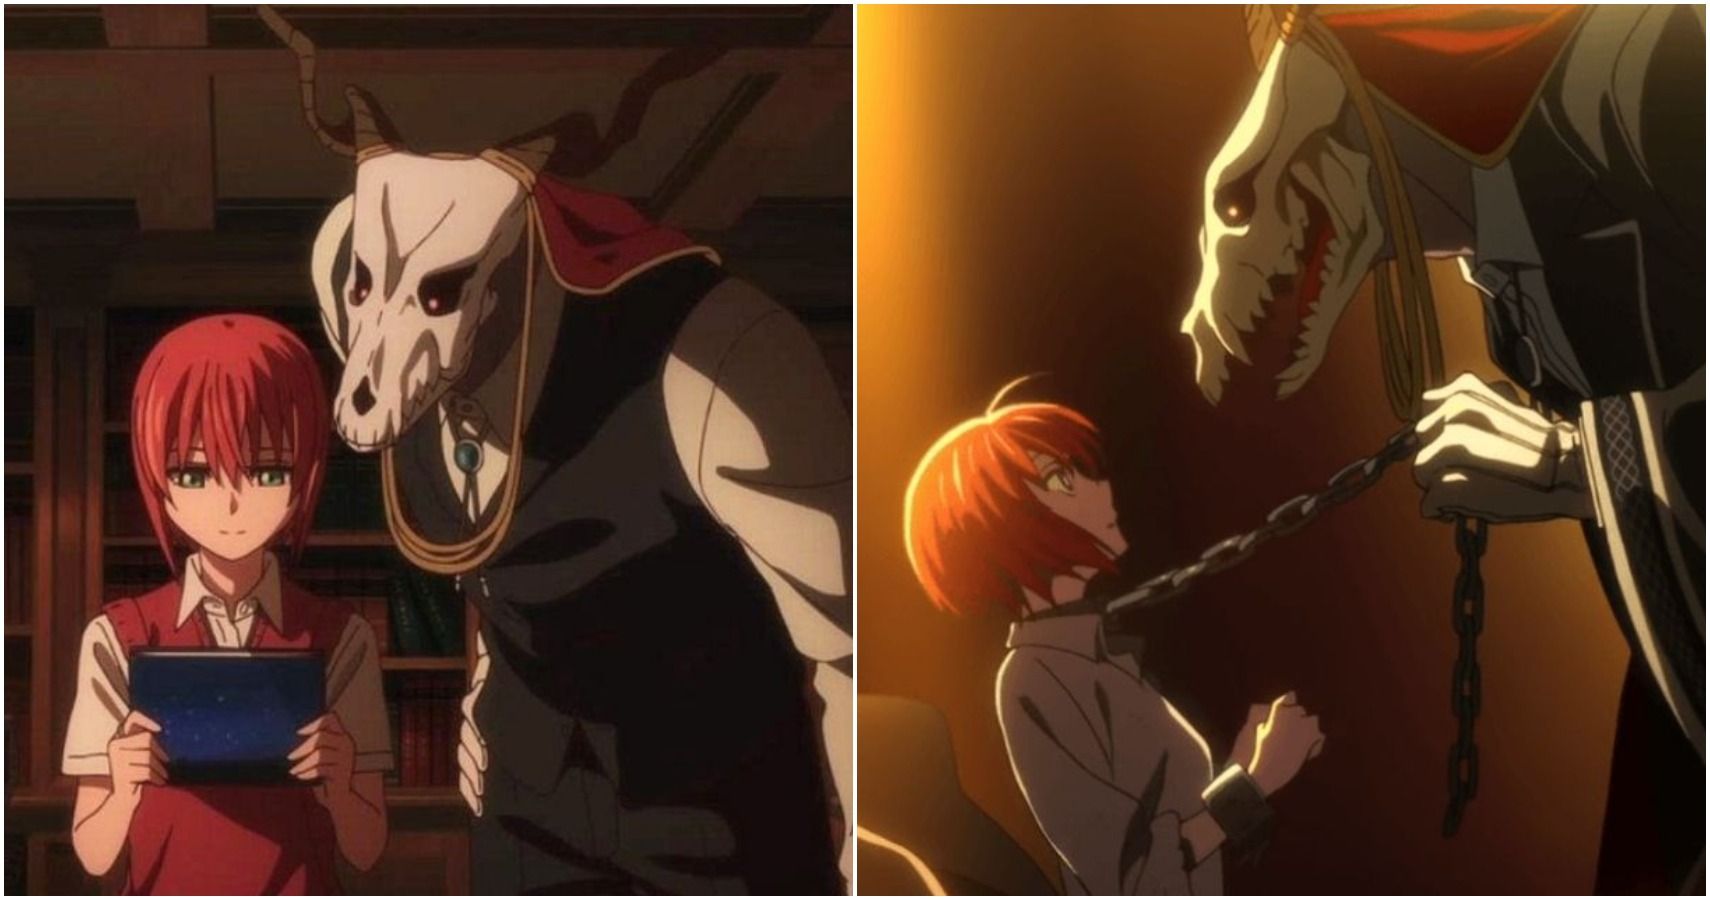 The Ancient Magus Bride 5 Reasons Why Chise Elias Are The Perfect Couple 5 Reasons Why They Re Not In the anime, he is voiced by ryota takeuchi who also voiced darui from naruto shippuden in the japanese version and for the english version he. the ancient magus bride 5 reasons why